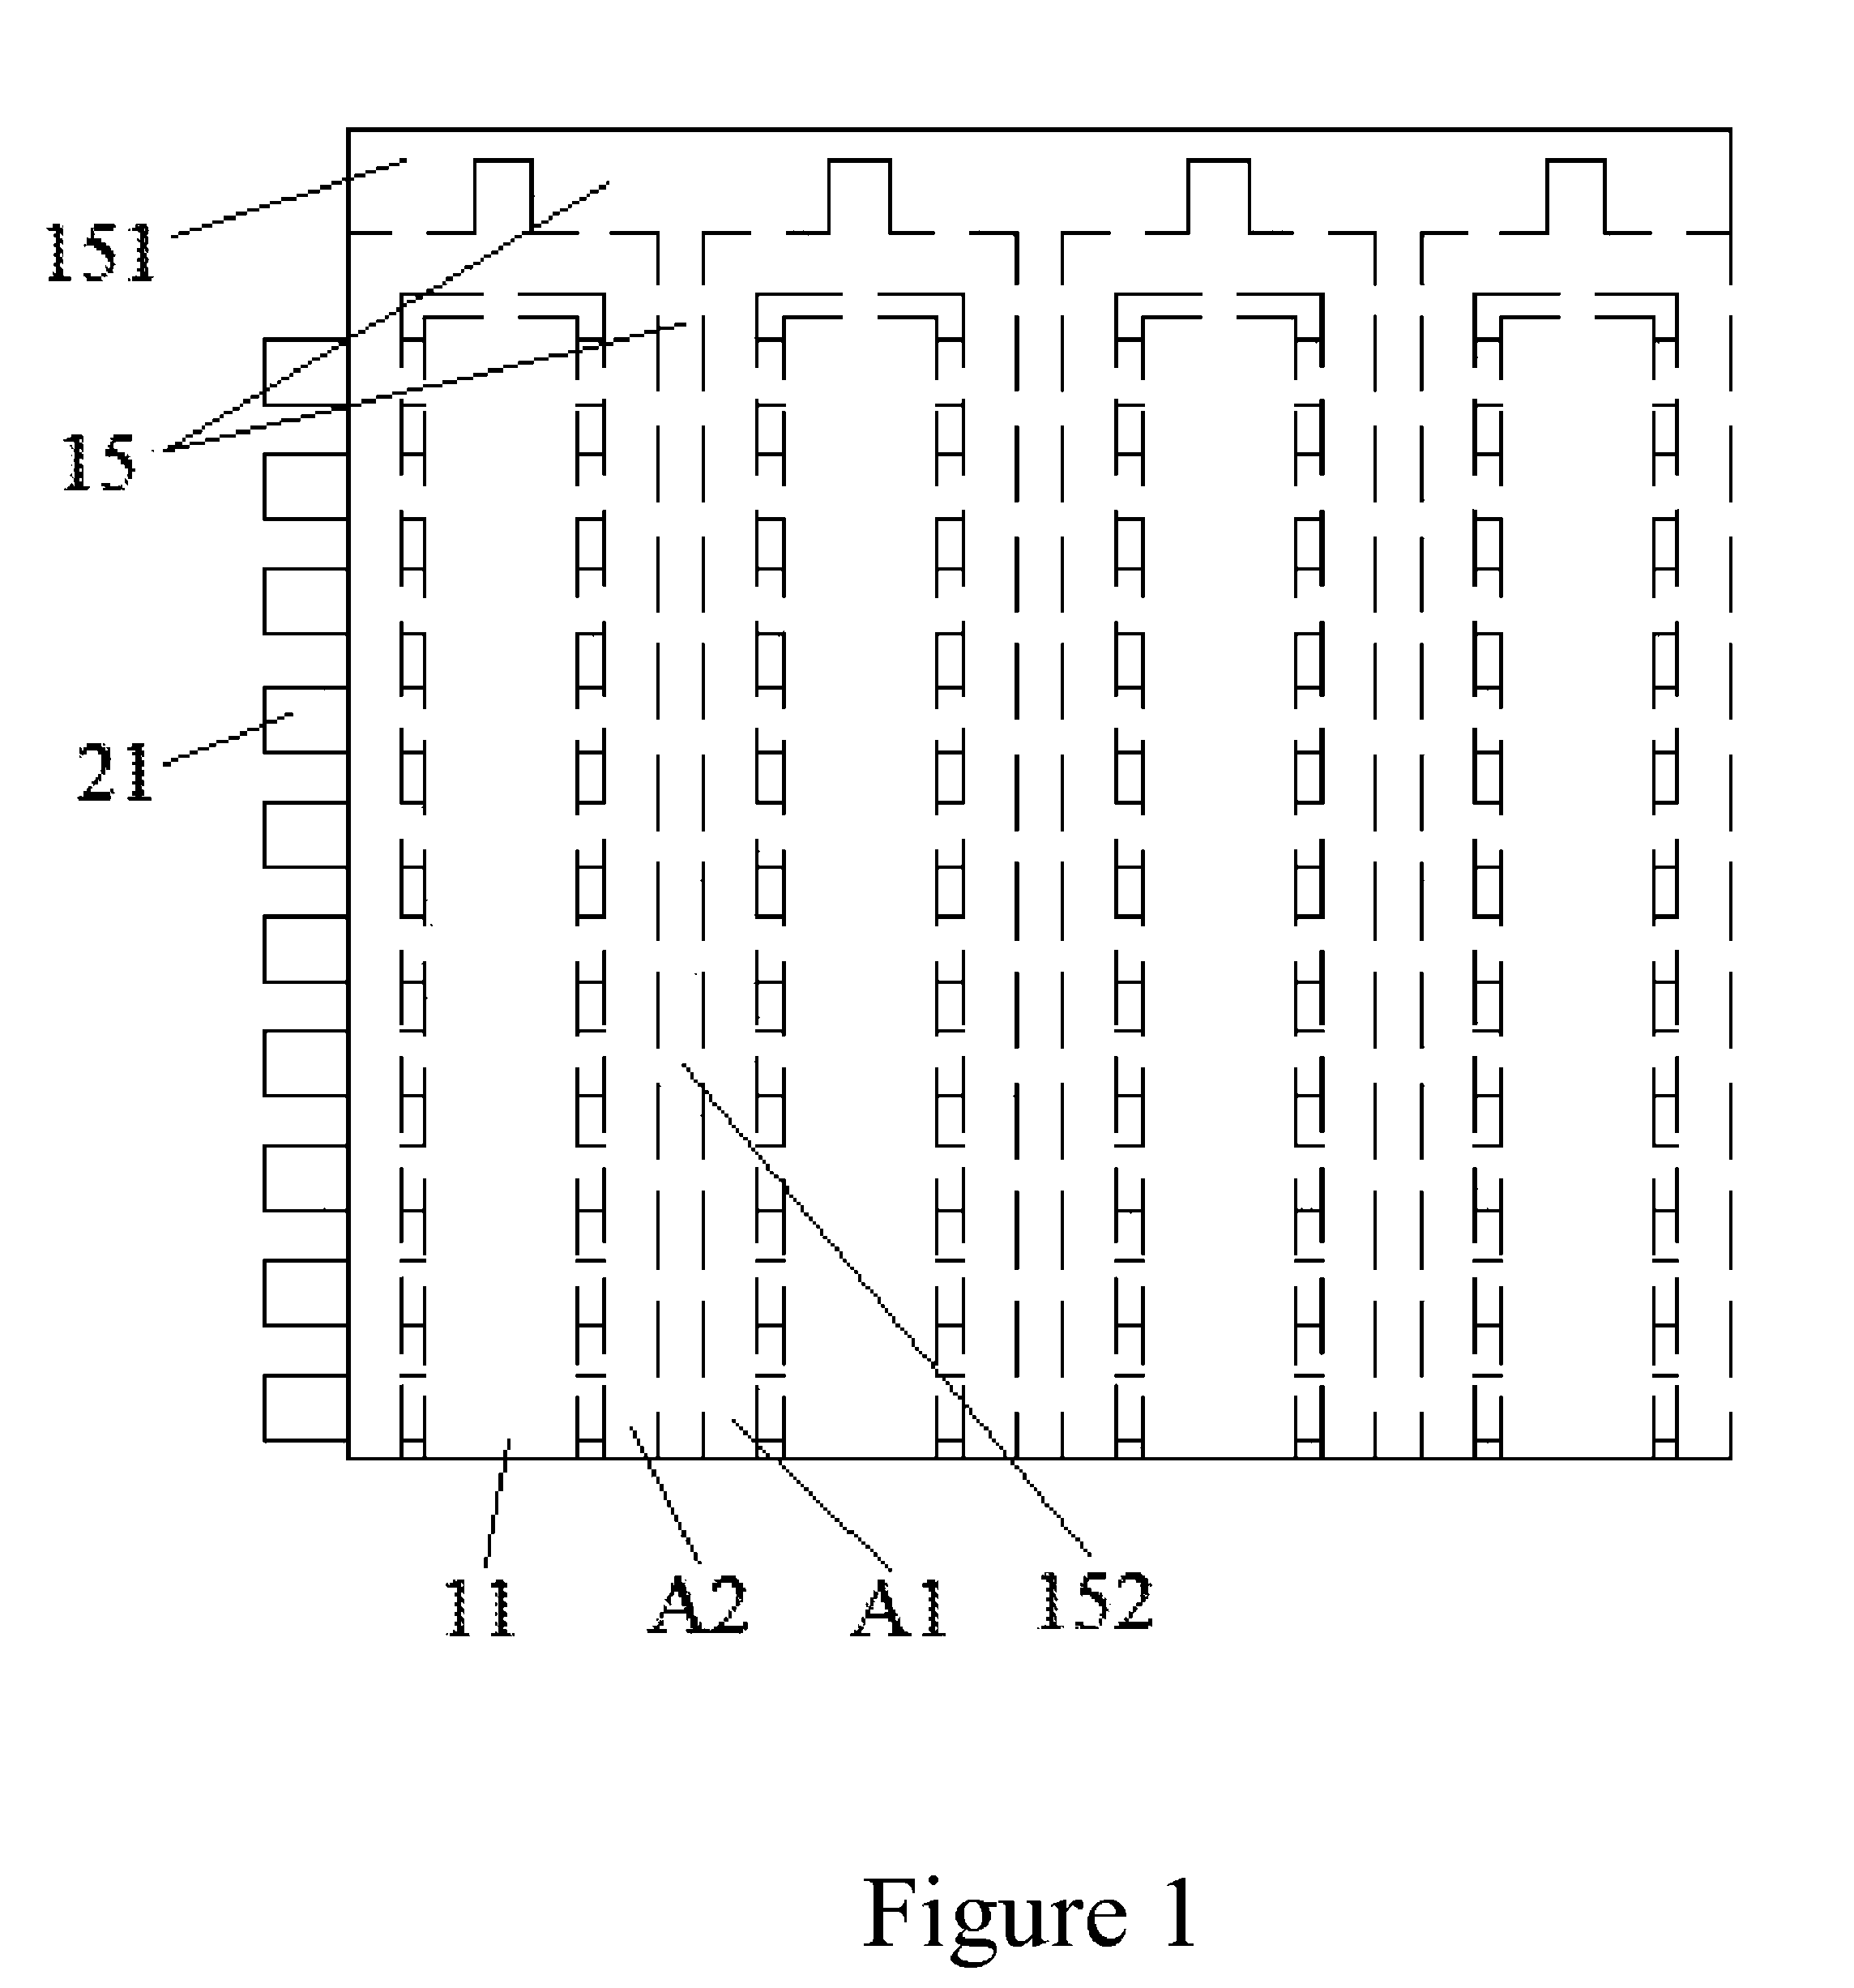 Symmetric quadrupole structured field emission display without spacer